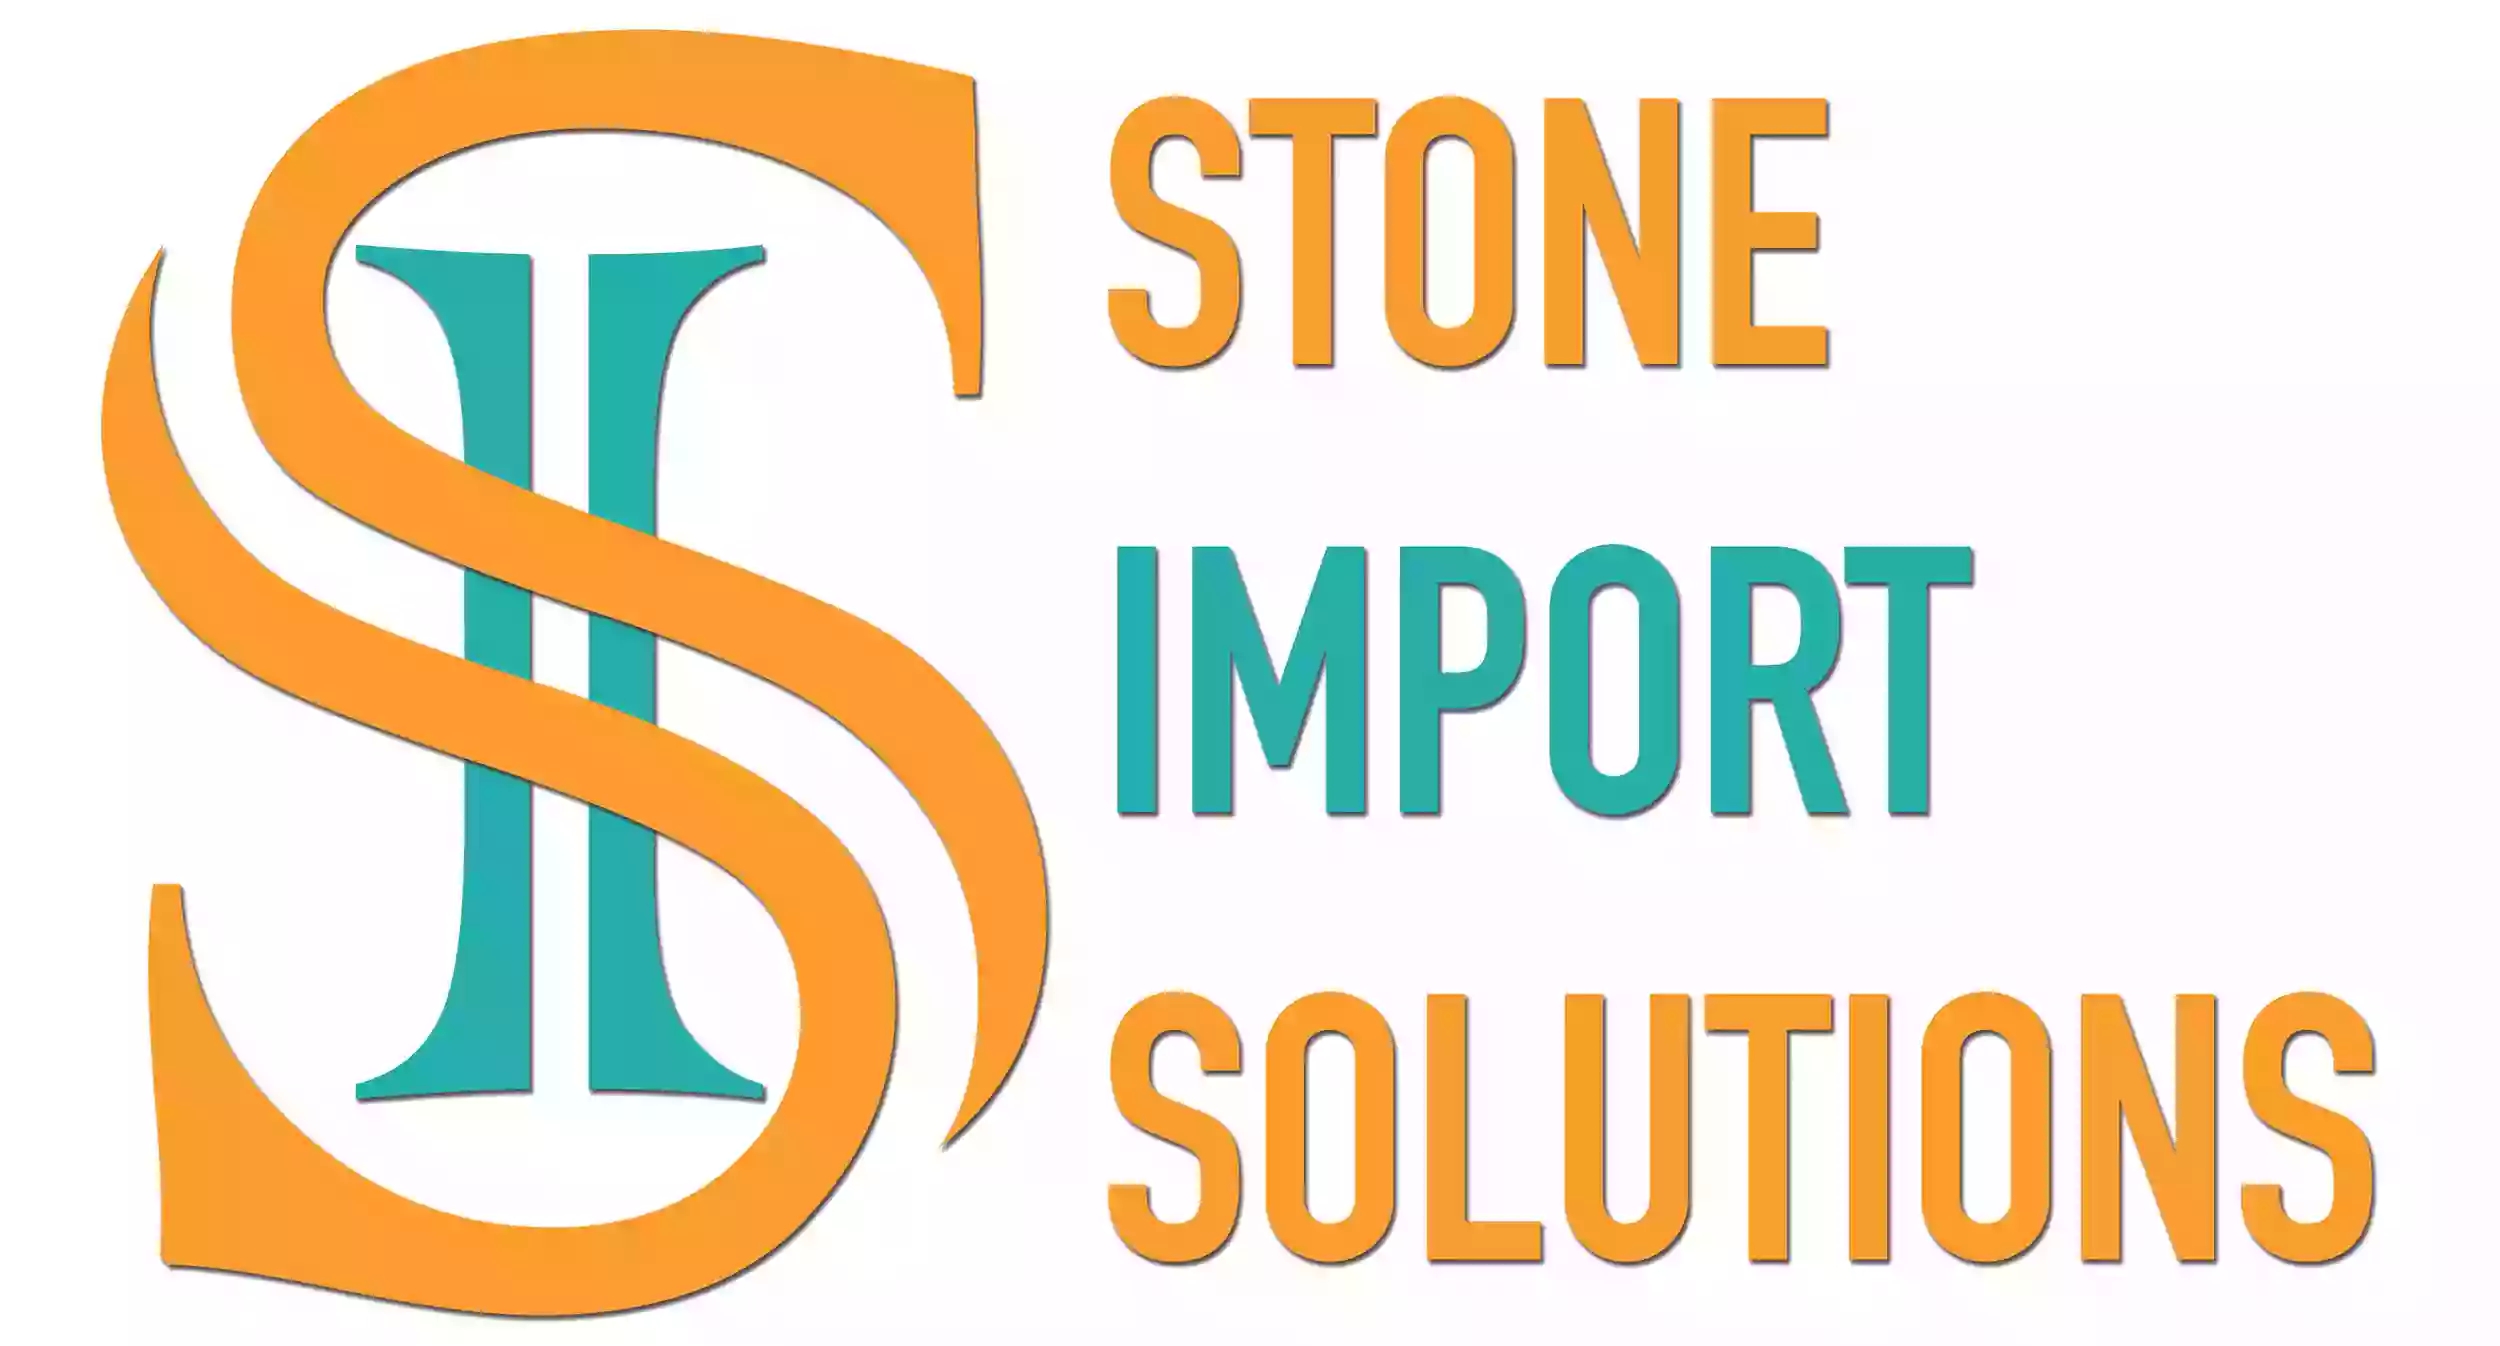 Stone Import Solutions